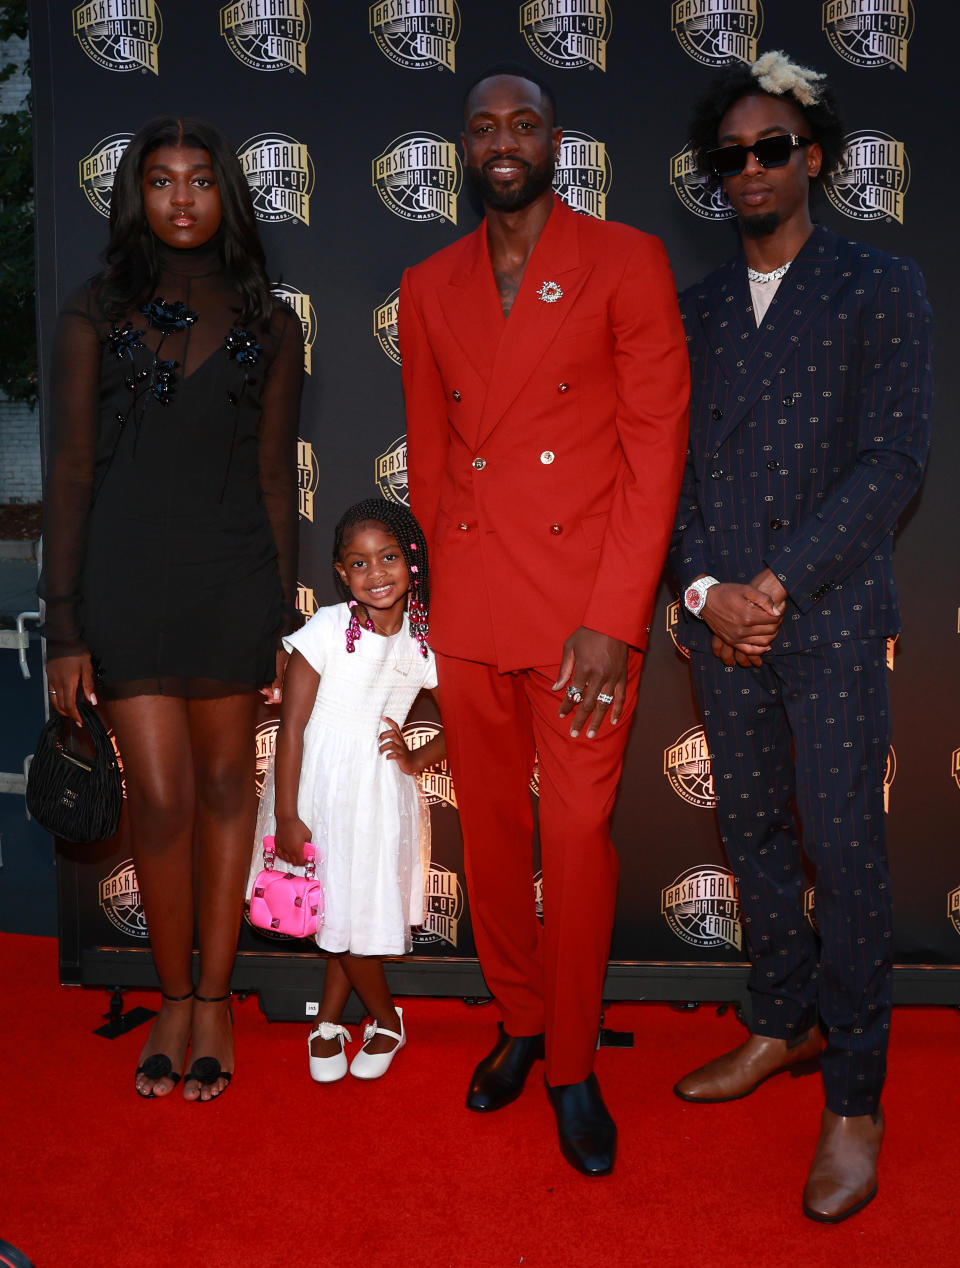 SPRINGFIELD, MASSACHUSETTS - AUGUST 12: Zaya Wade, Kaavia James Wade, 2023 inductee Dwyane Wade and Zaire Wade attend the 2023 Naismith Basketball Hall of Fame Induction at Symphony Hall on August 12, 2023 in Springfield, Massachusetts. (Photo by Mike Lawrie/Getty Images)